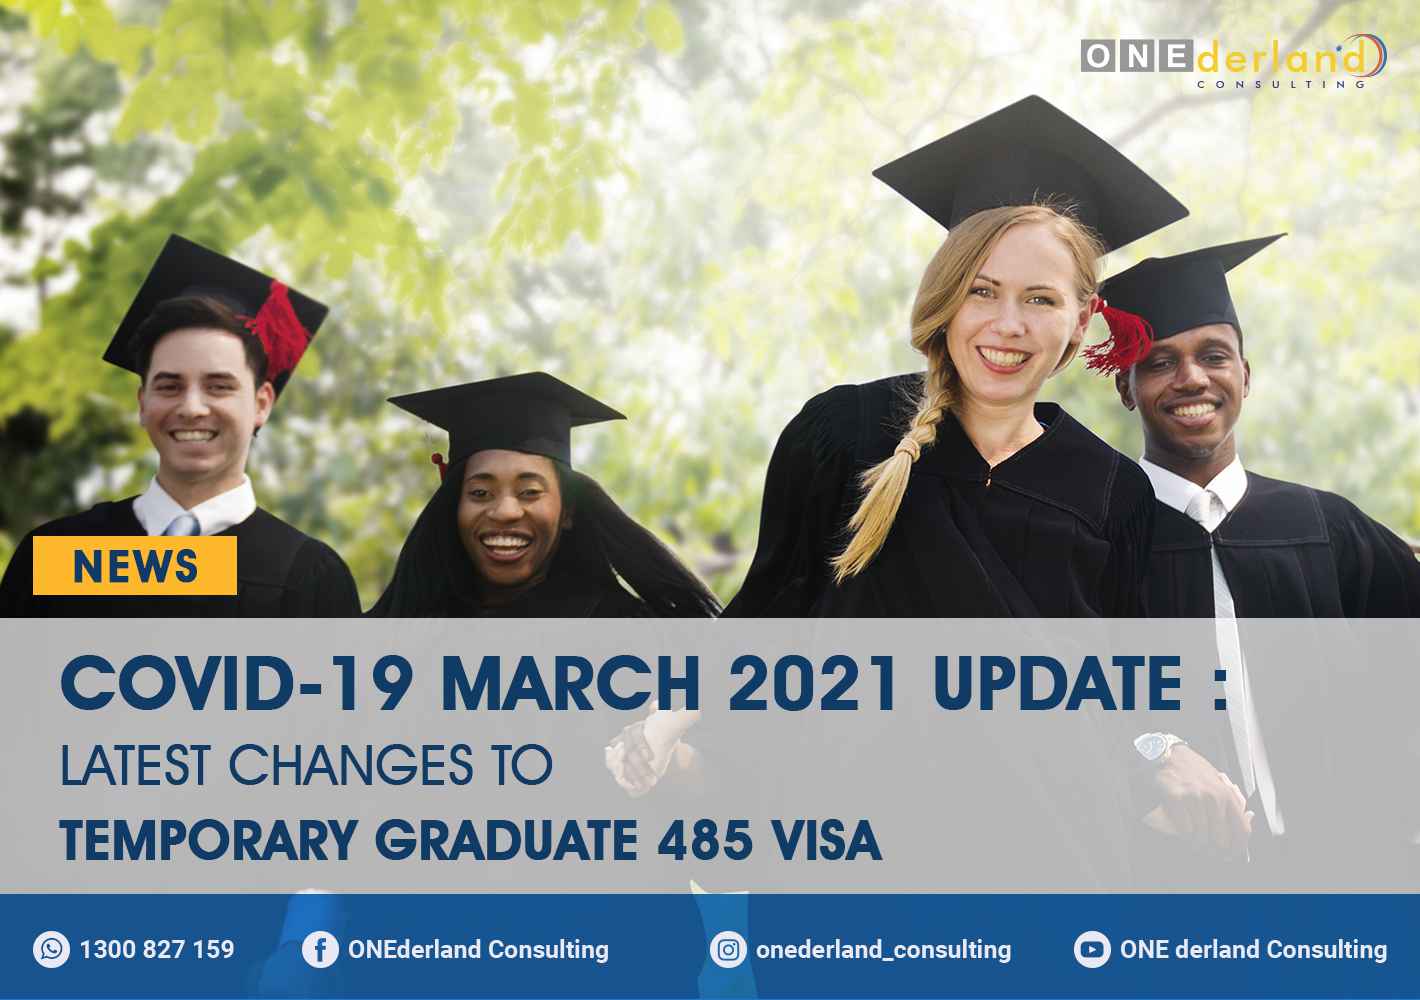 COVID-19 UPDATE: March 2021 Changes to Temporary Graduate 485 Visa